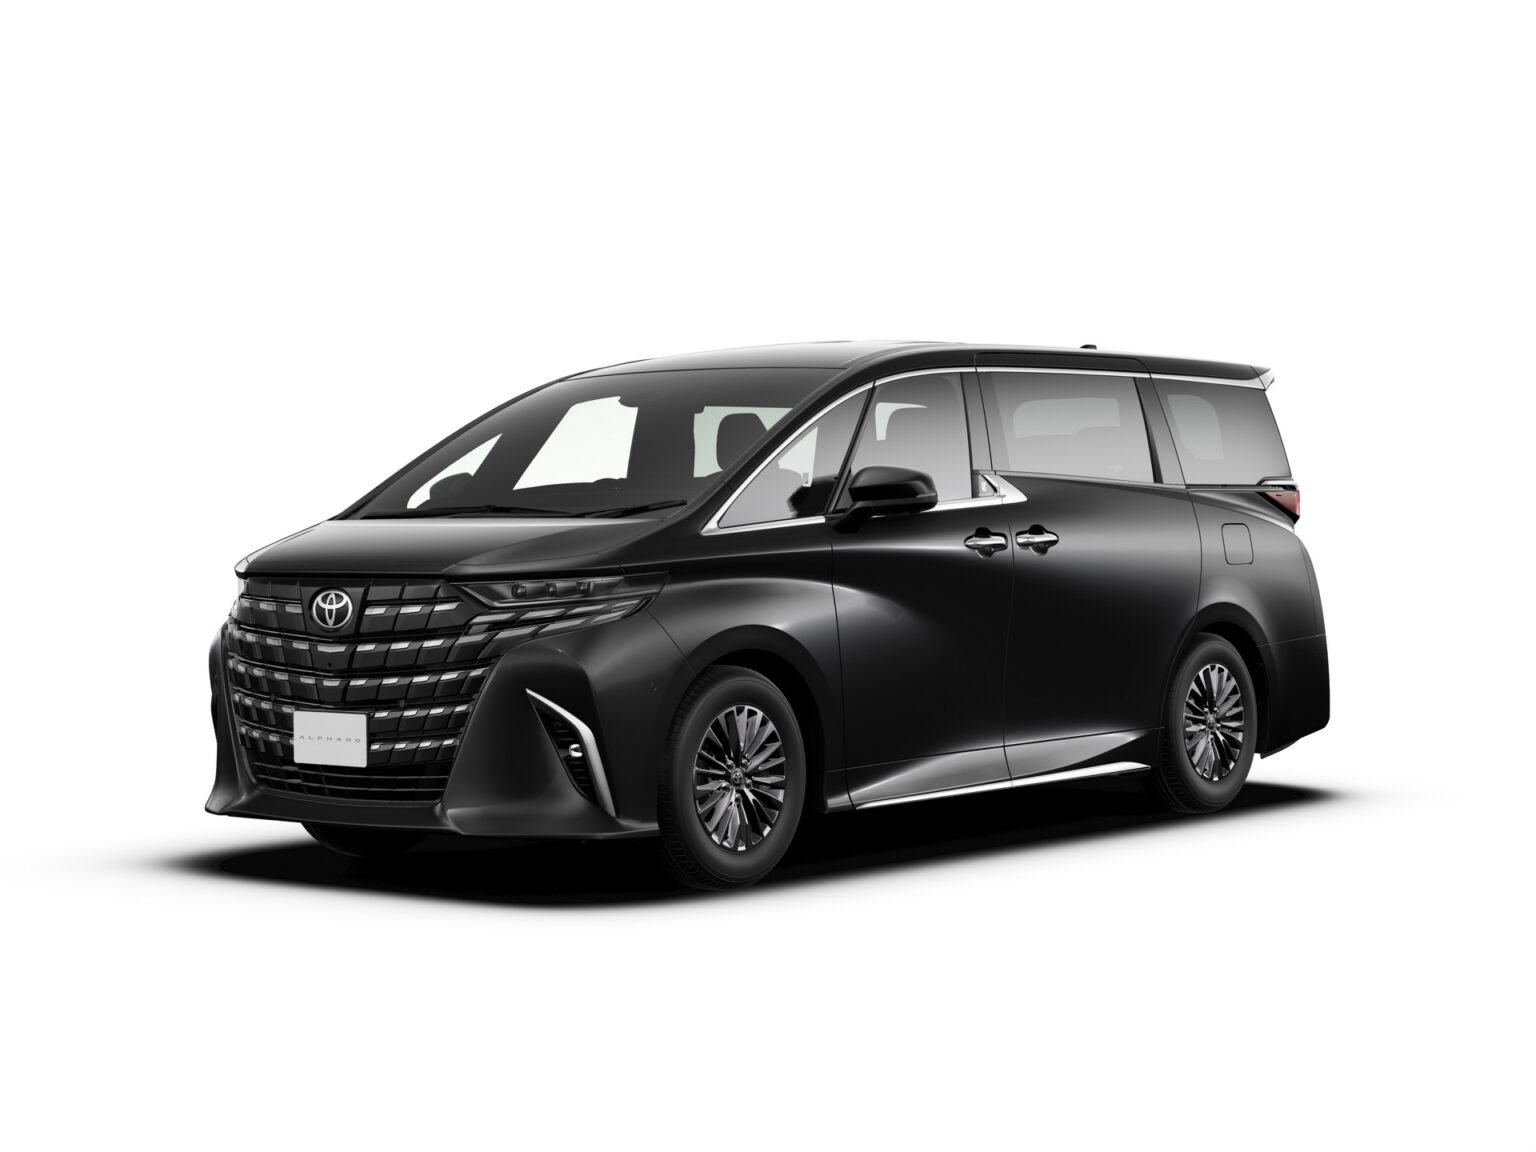 2024 Toyota Alphard And Vellfire Debut In Japan With Huge Grilles And ...